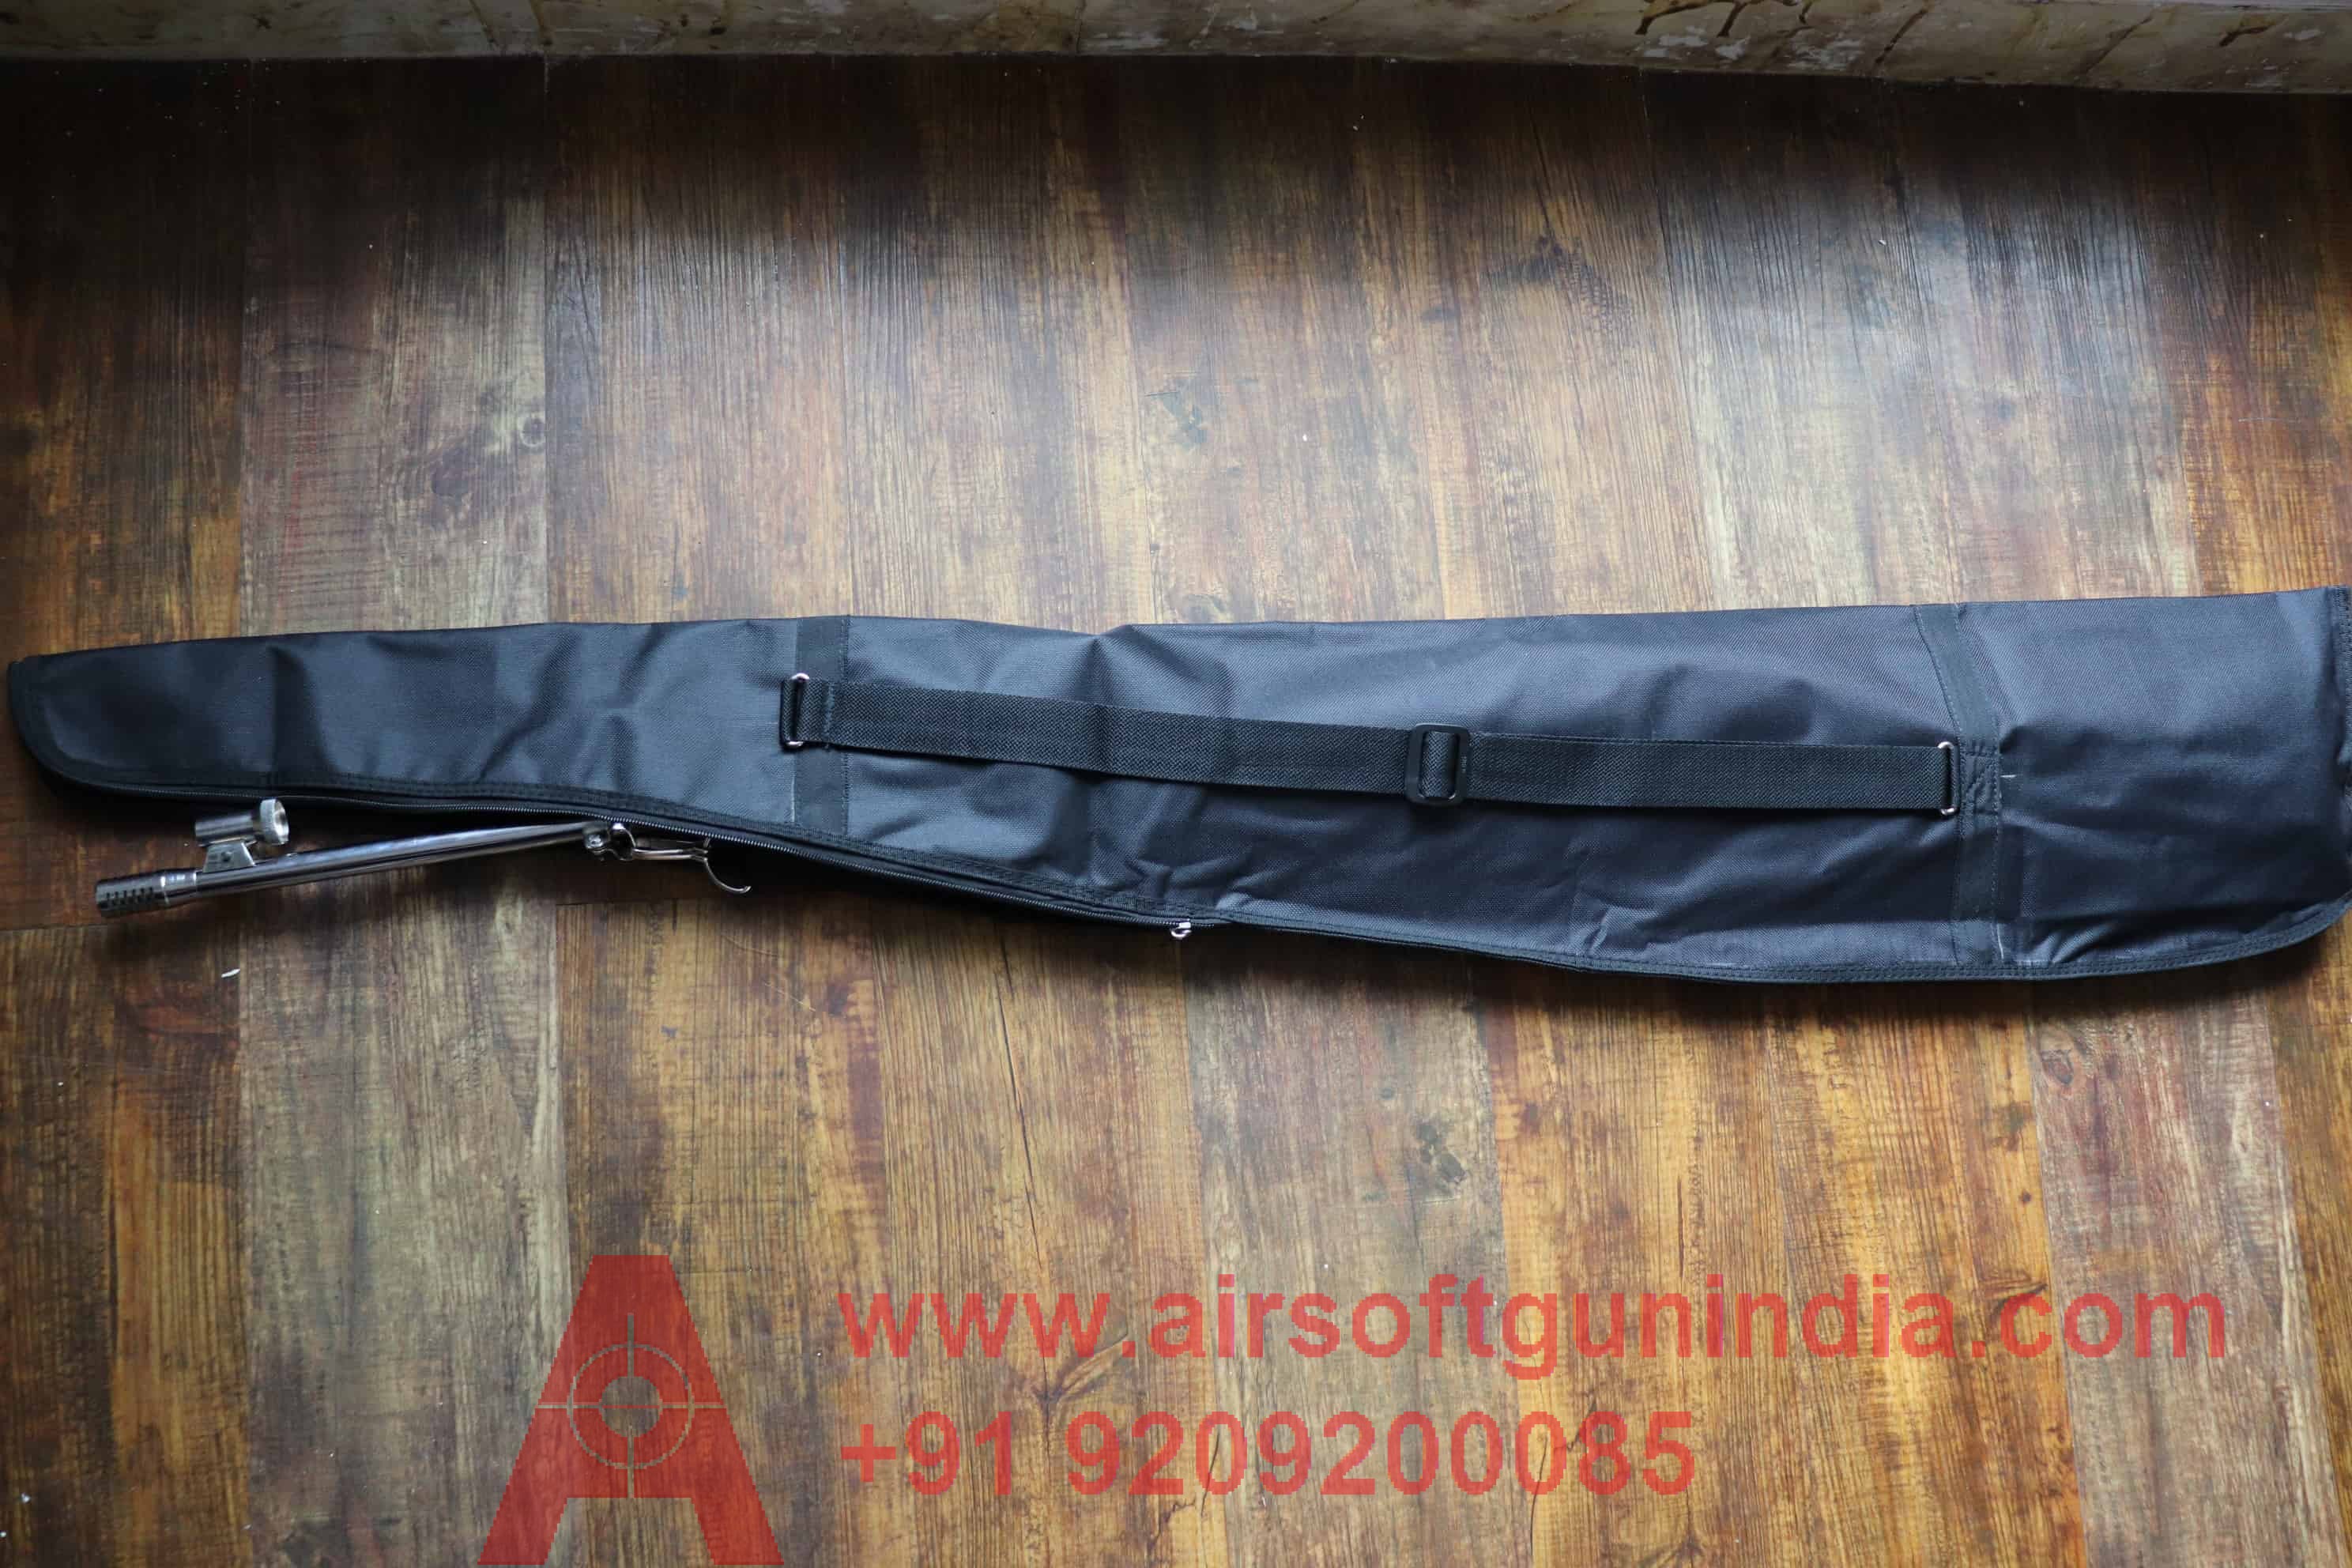 RIFLE COVER FOR AIR RIFLE IN INDIA